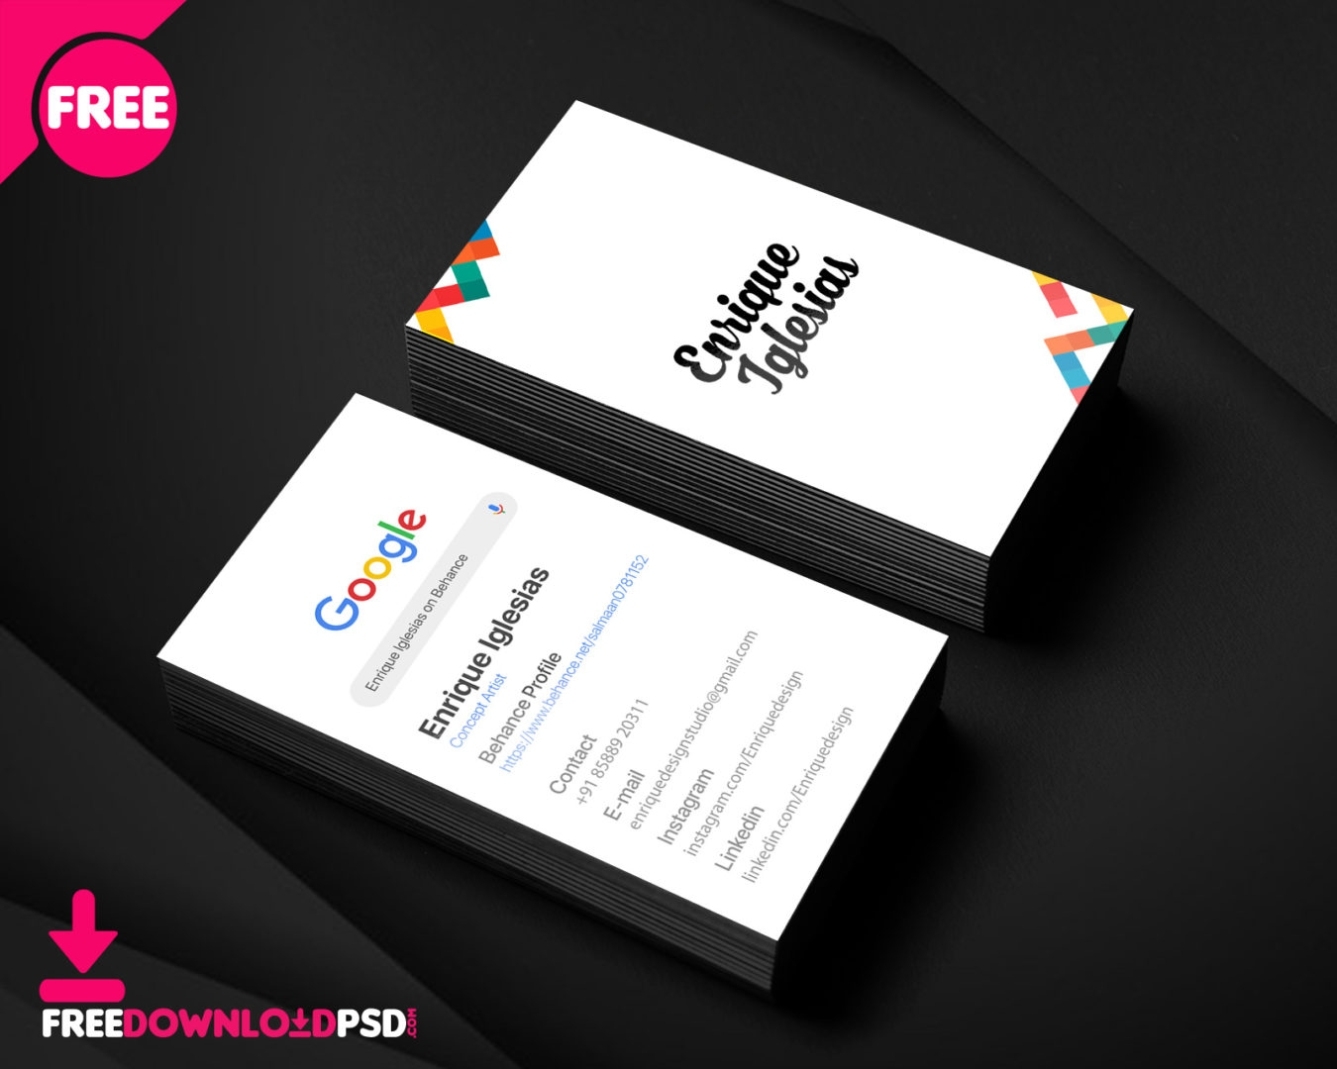 Personal Free Bussiness Card Template | Freedownloadpsd Intended For Free Personal Business Card Templates